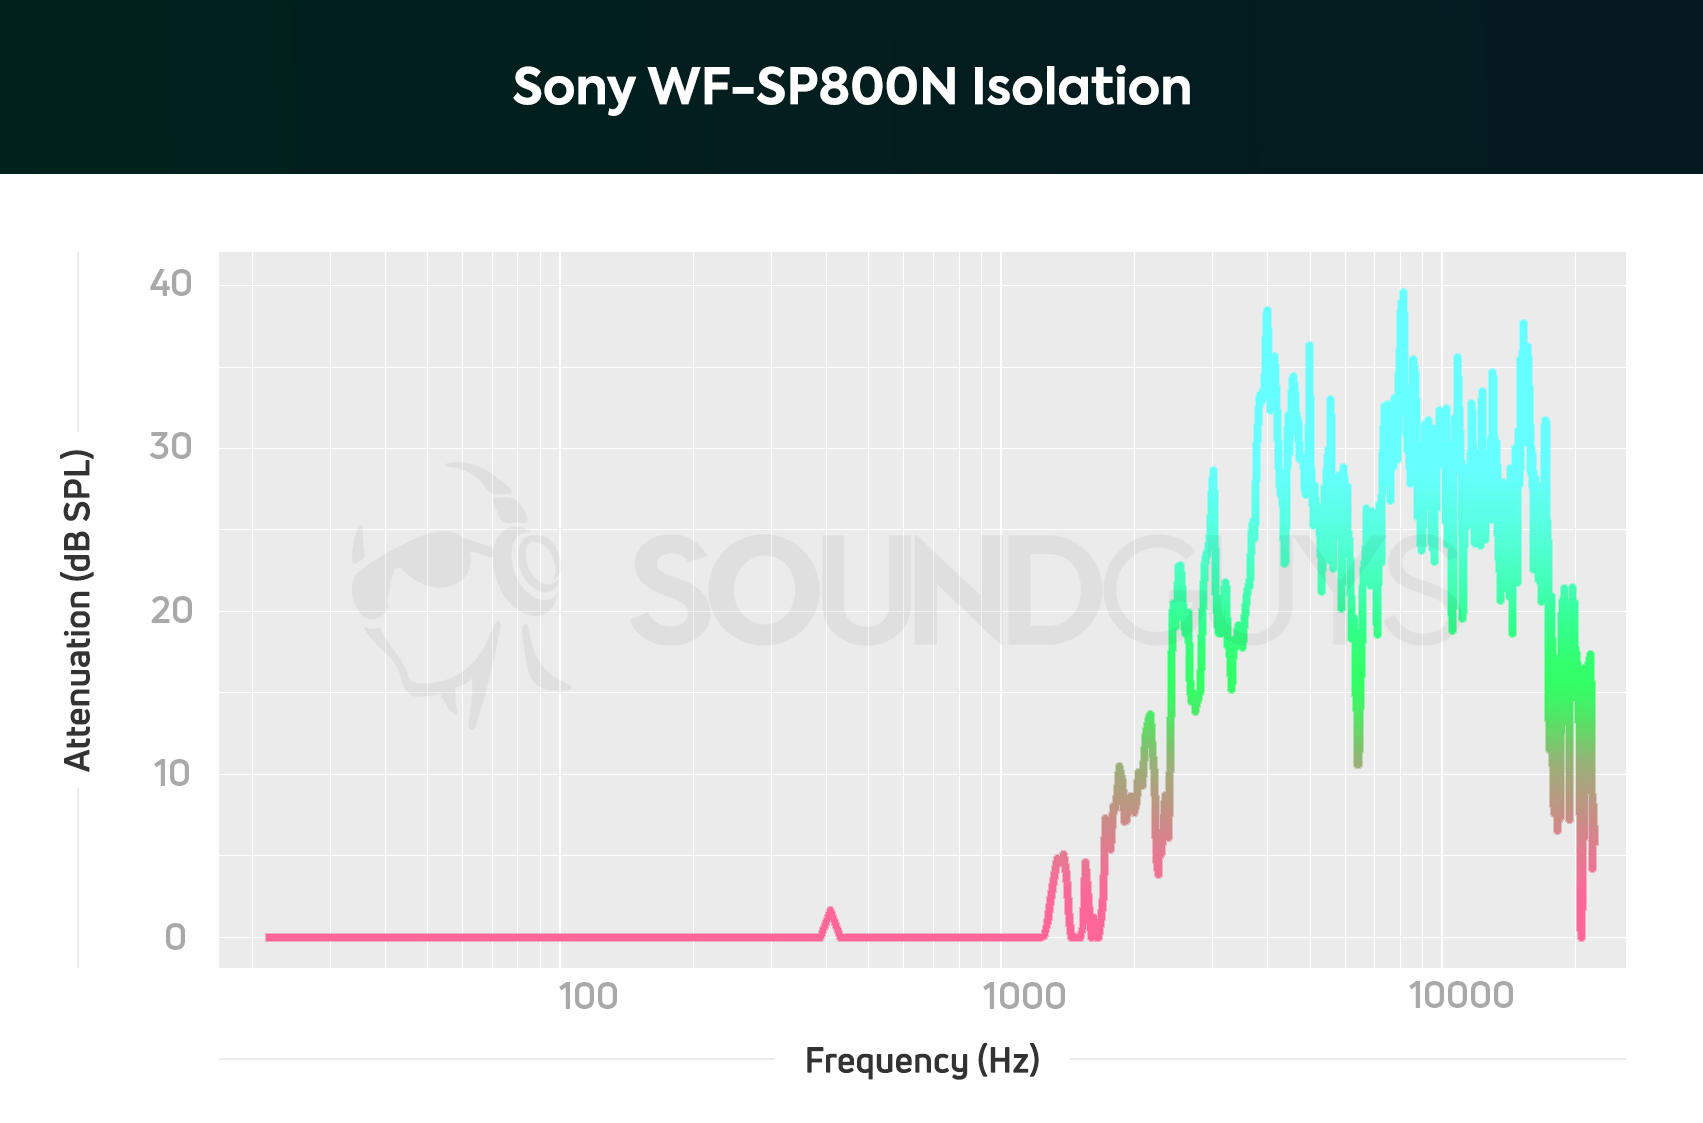 Sony WF-SP800N isolation isn't great and barely blocks any outside noise